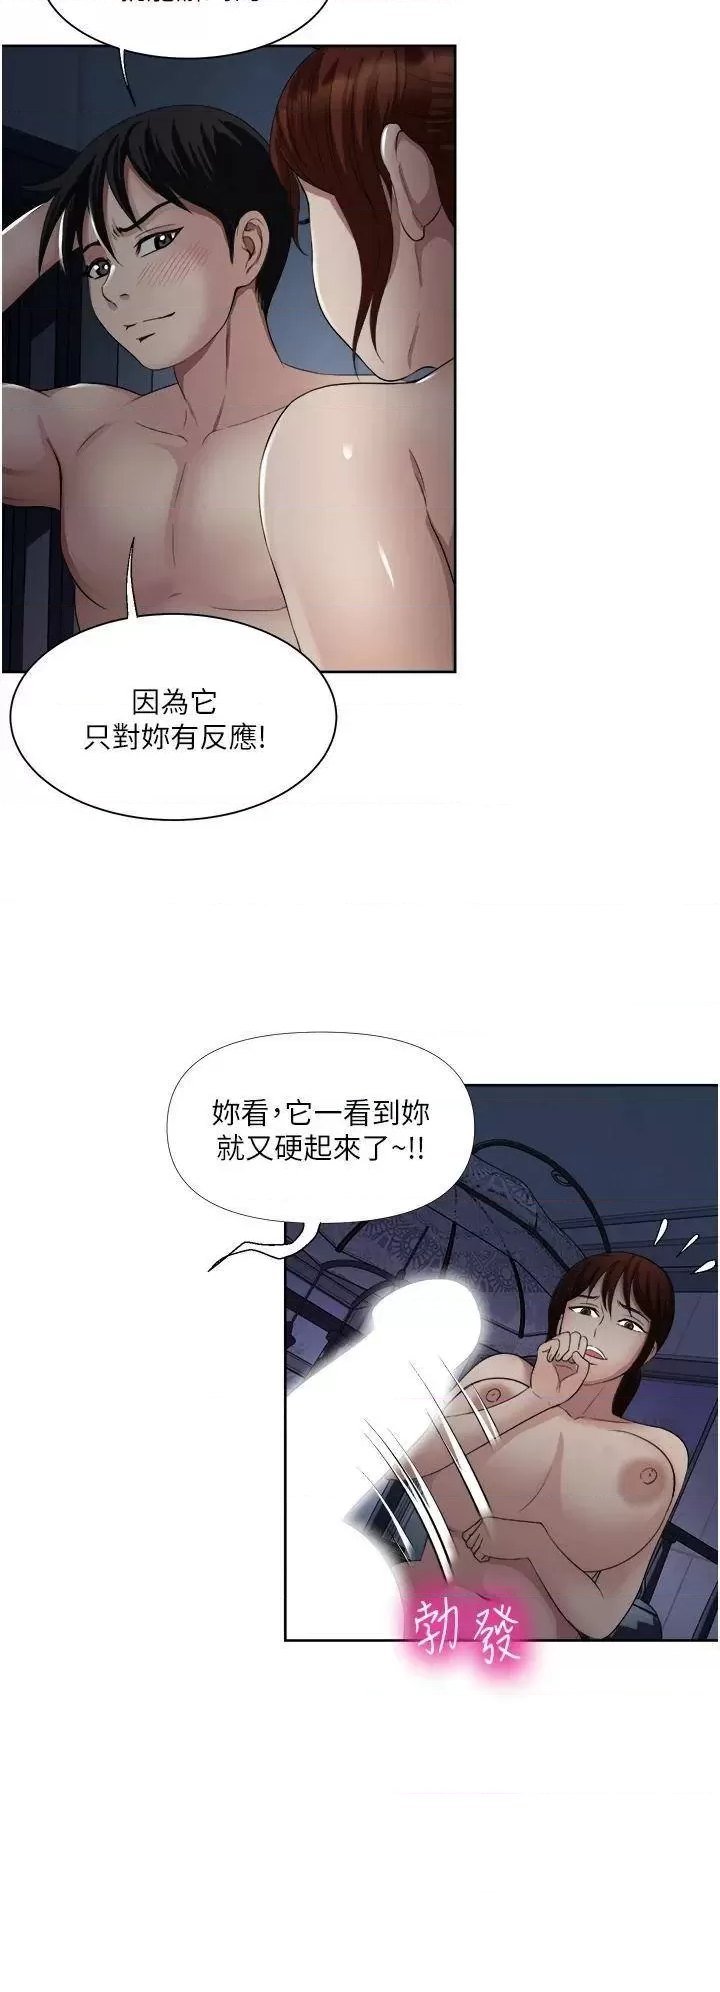 just-once-raw-chap-22-7